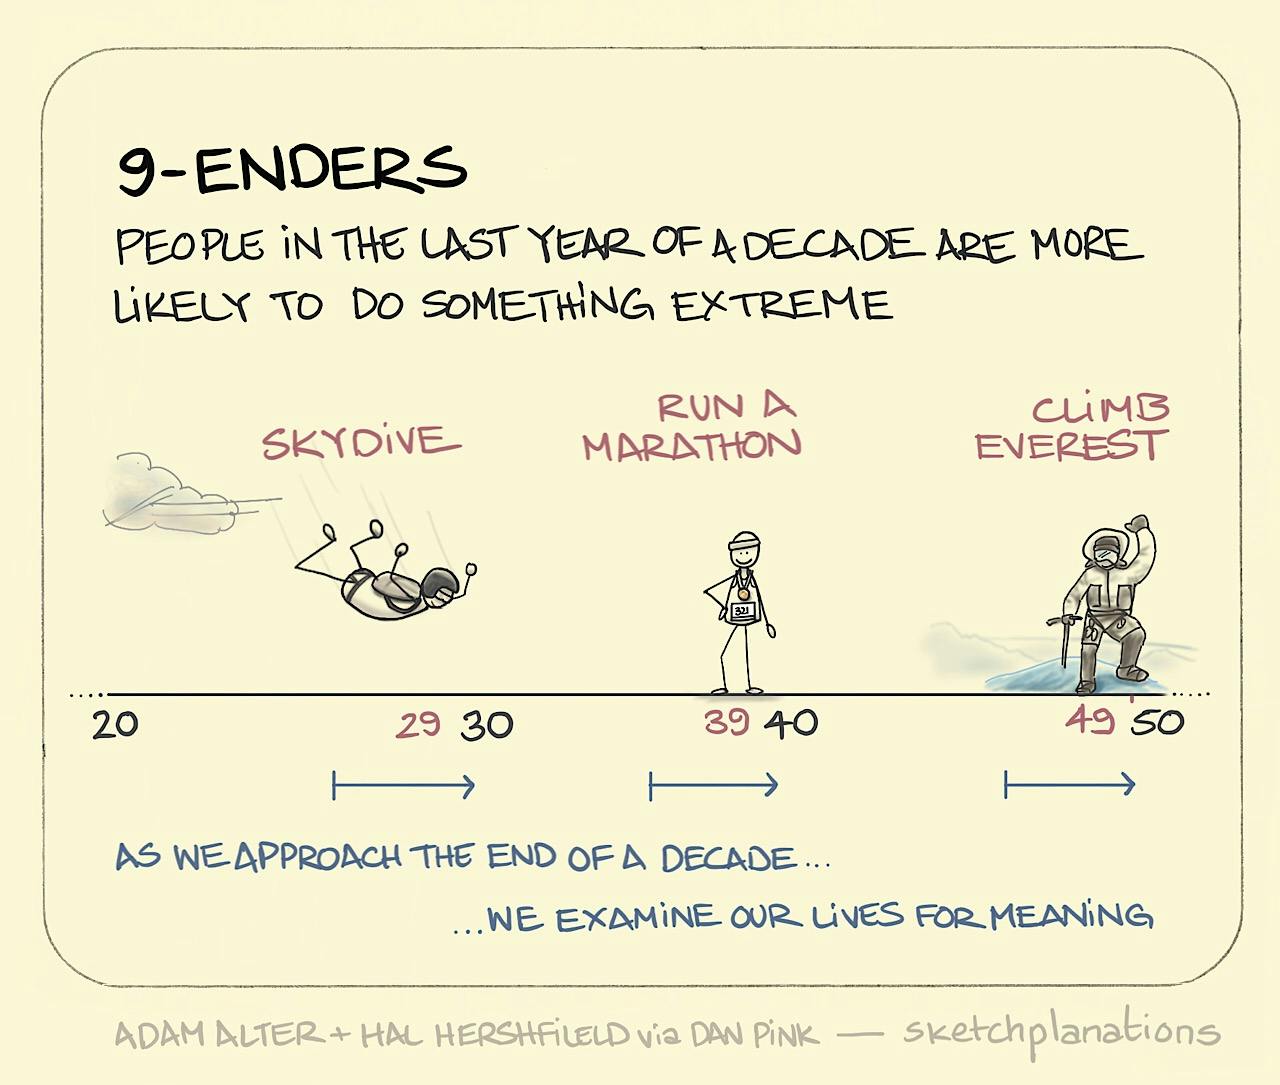 9-enders (nine-enders) explanation: people approaching their 30s, 40s and 50s, examining their lives for meaning and setting off skydiving, running marathons and climbing Everest